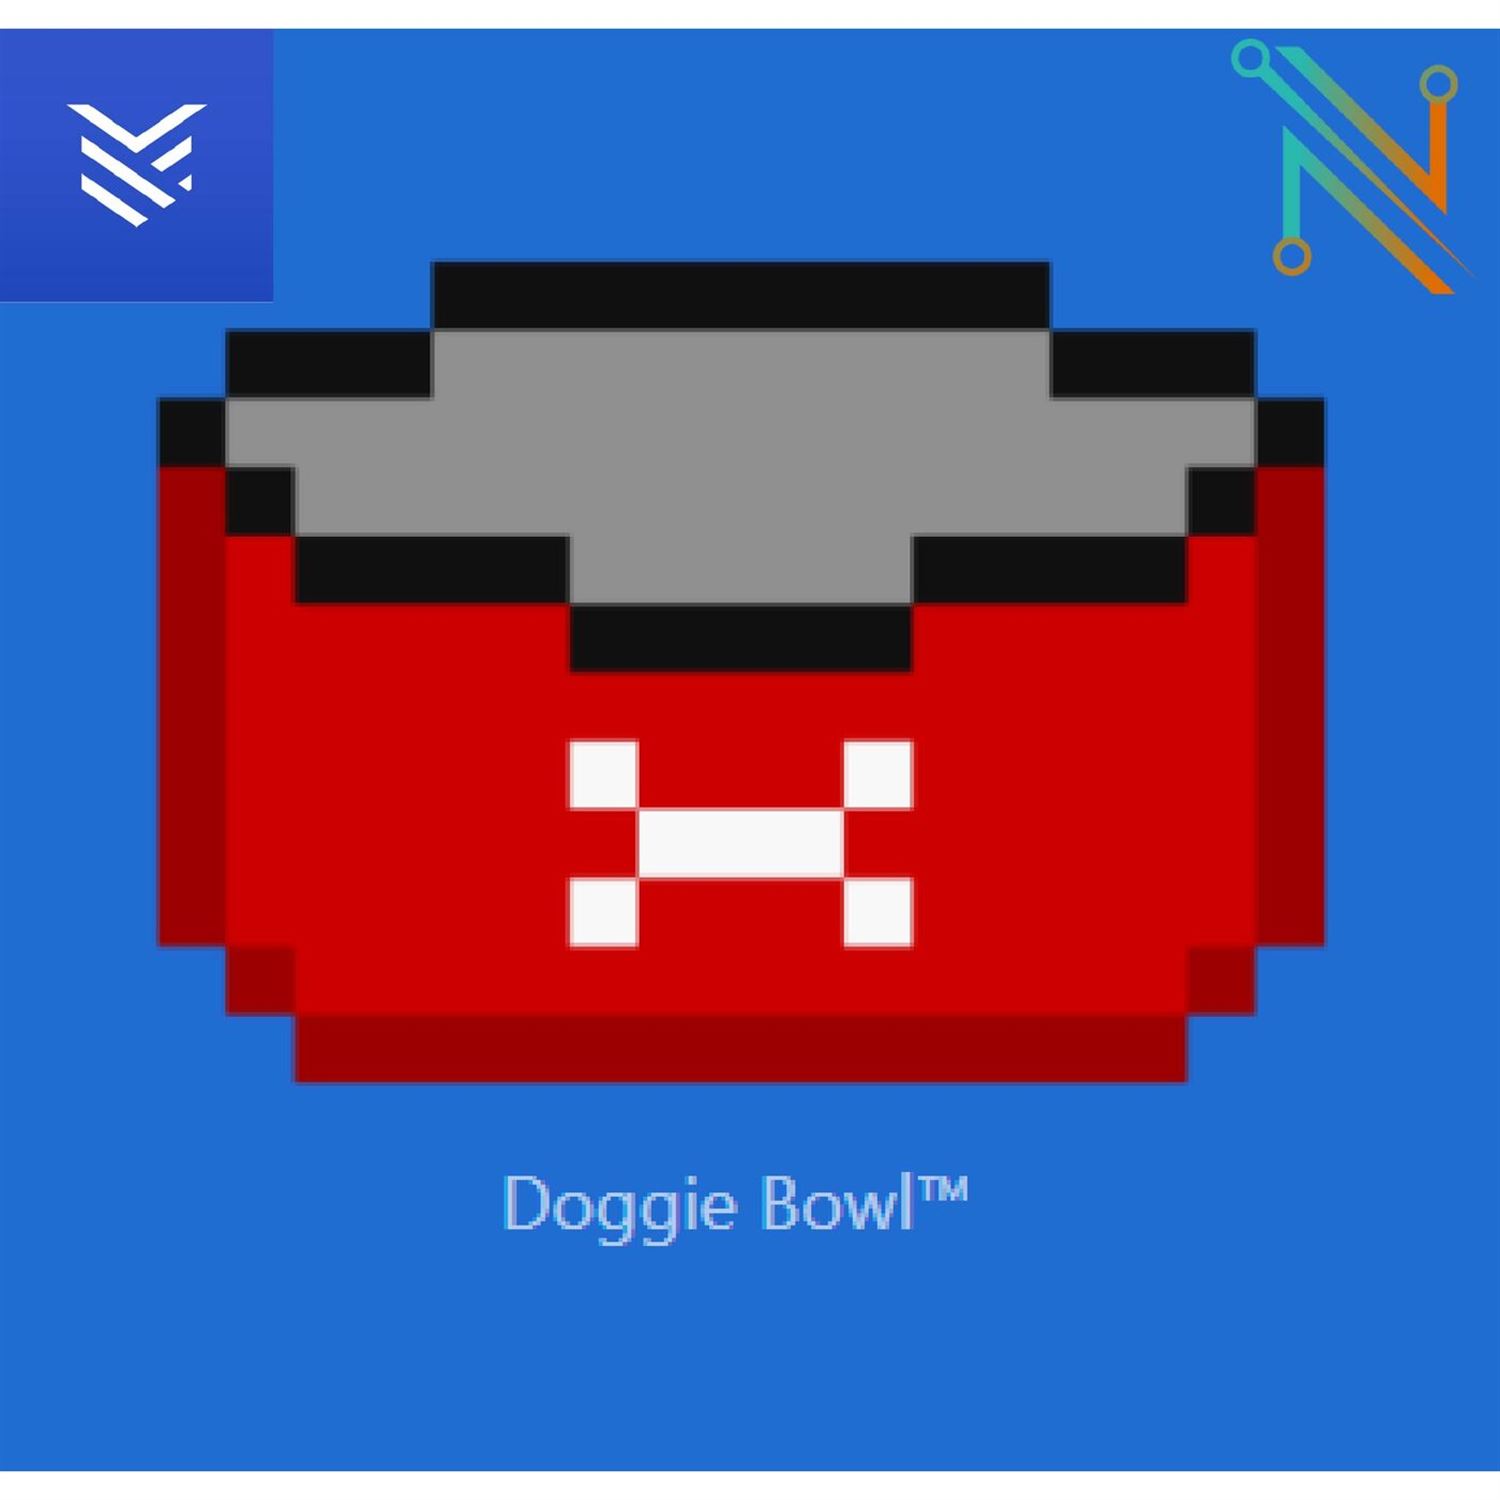 The Doggie Bowl madness